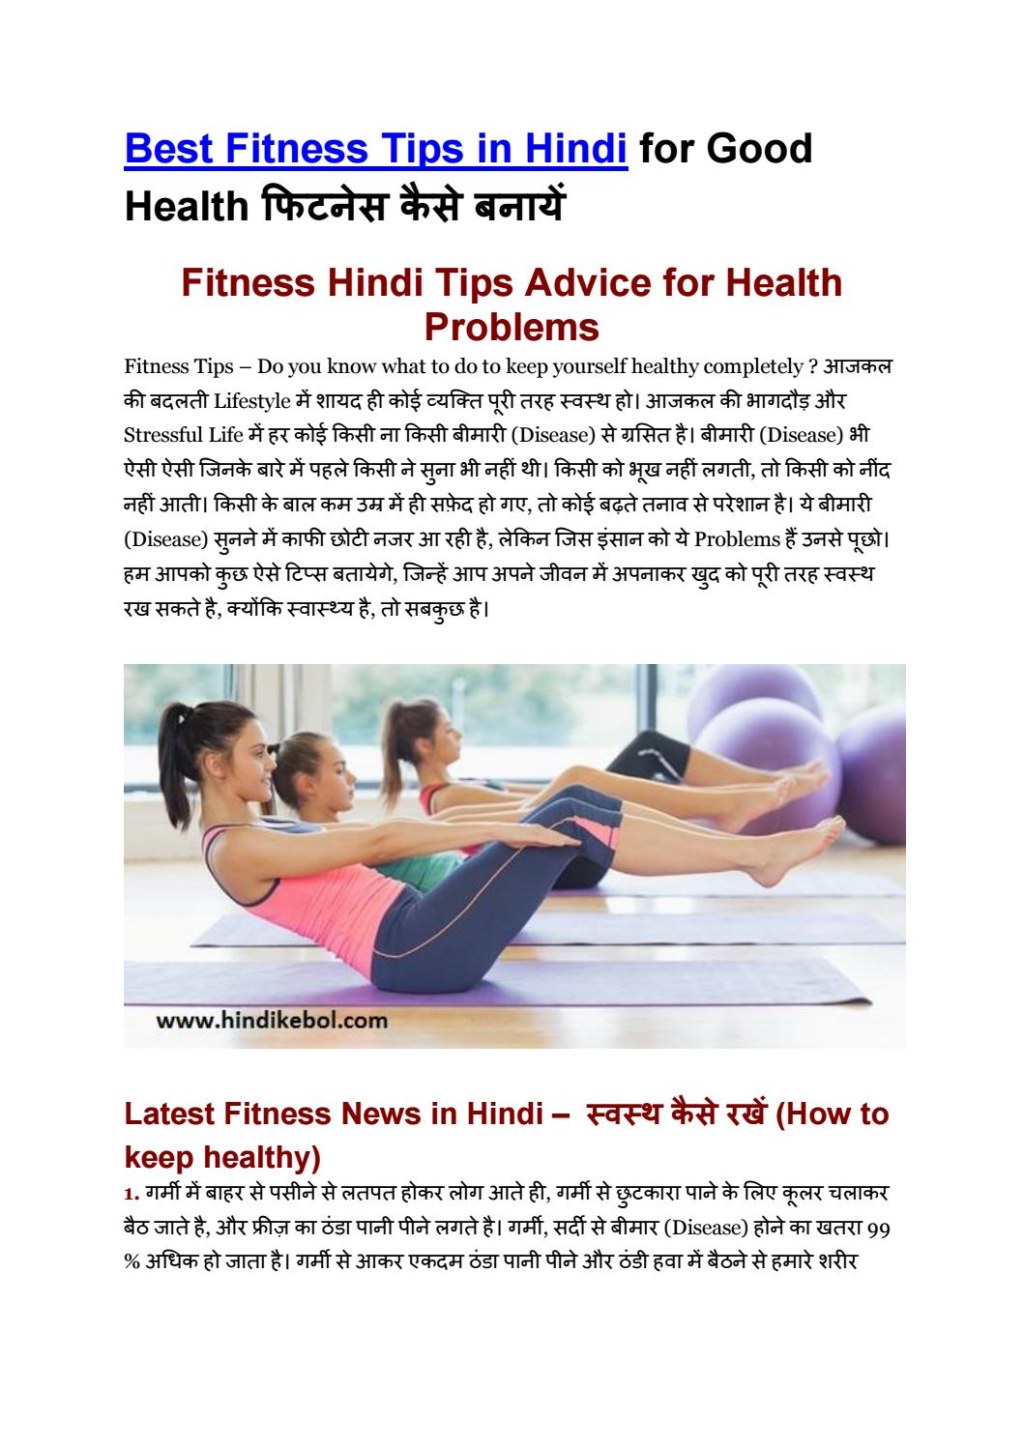 Picture of: Best fitness tips in hindi by Hindi Ke Bol – Issuu